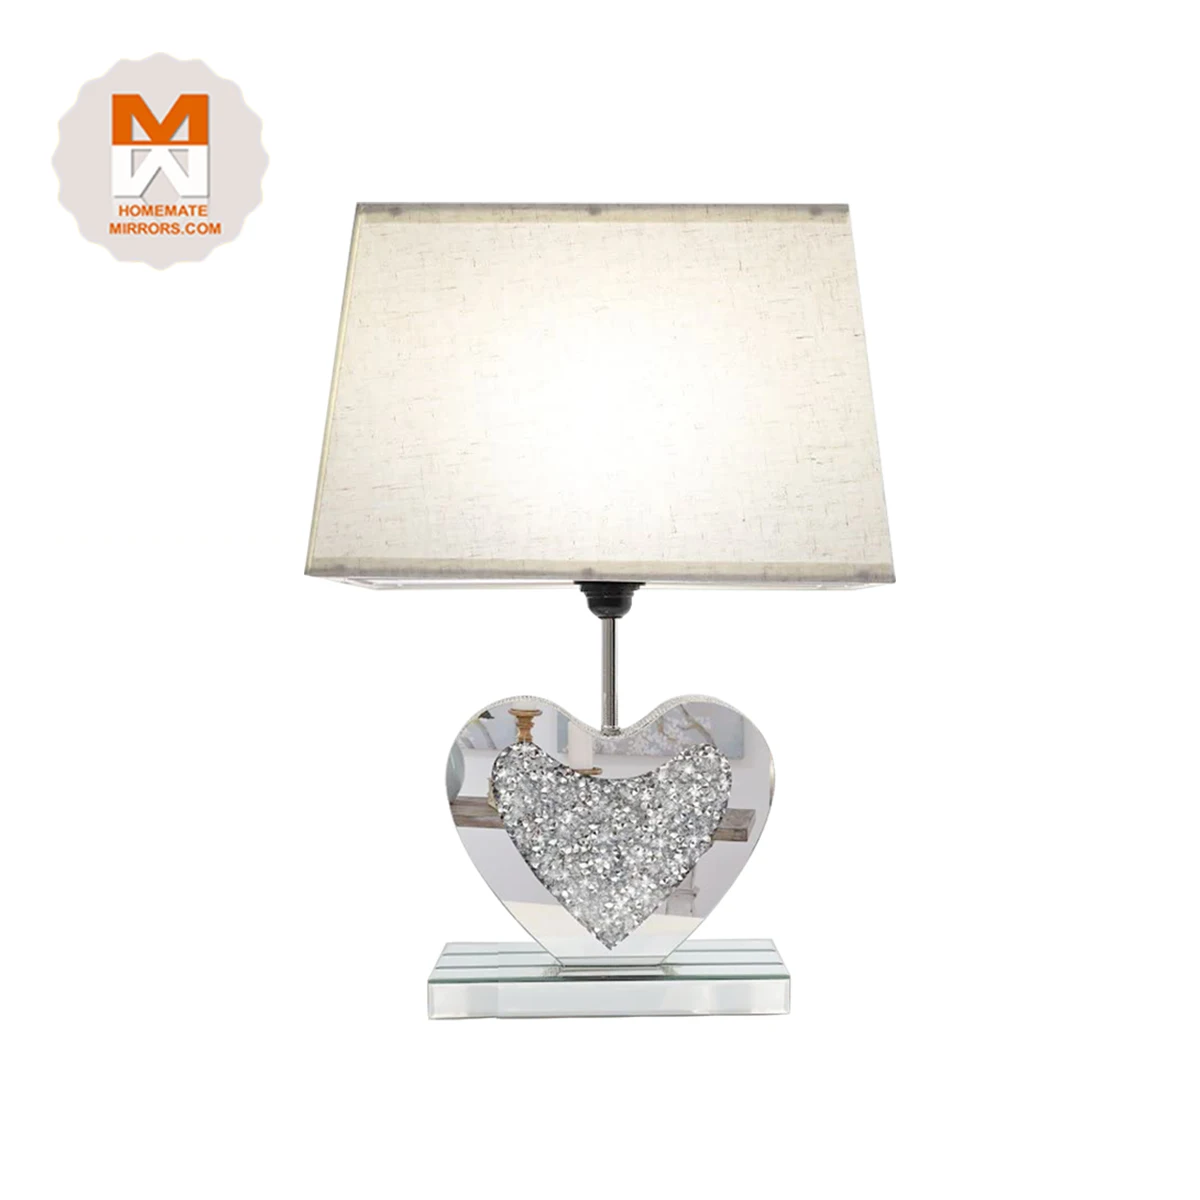 Hot sell Competitive Heart shape mirrored bedside table lamps